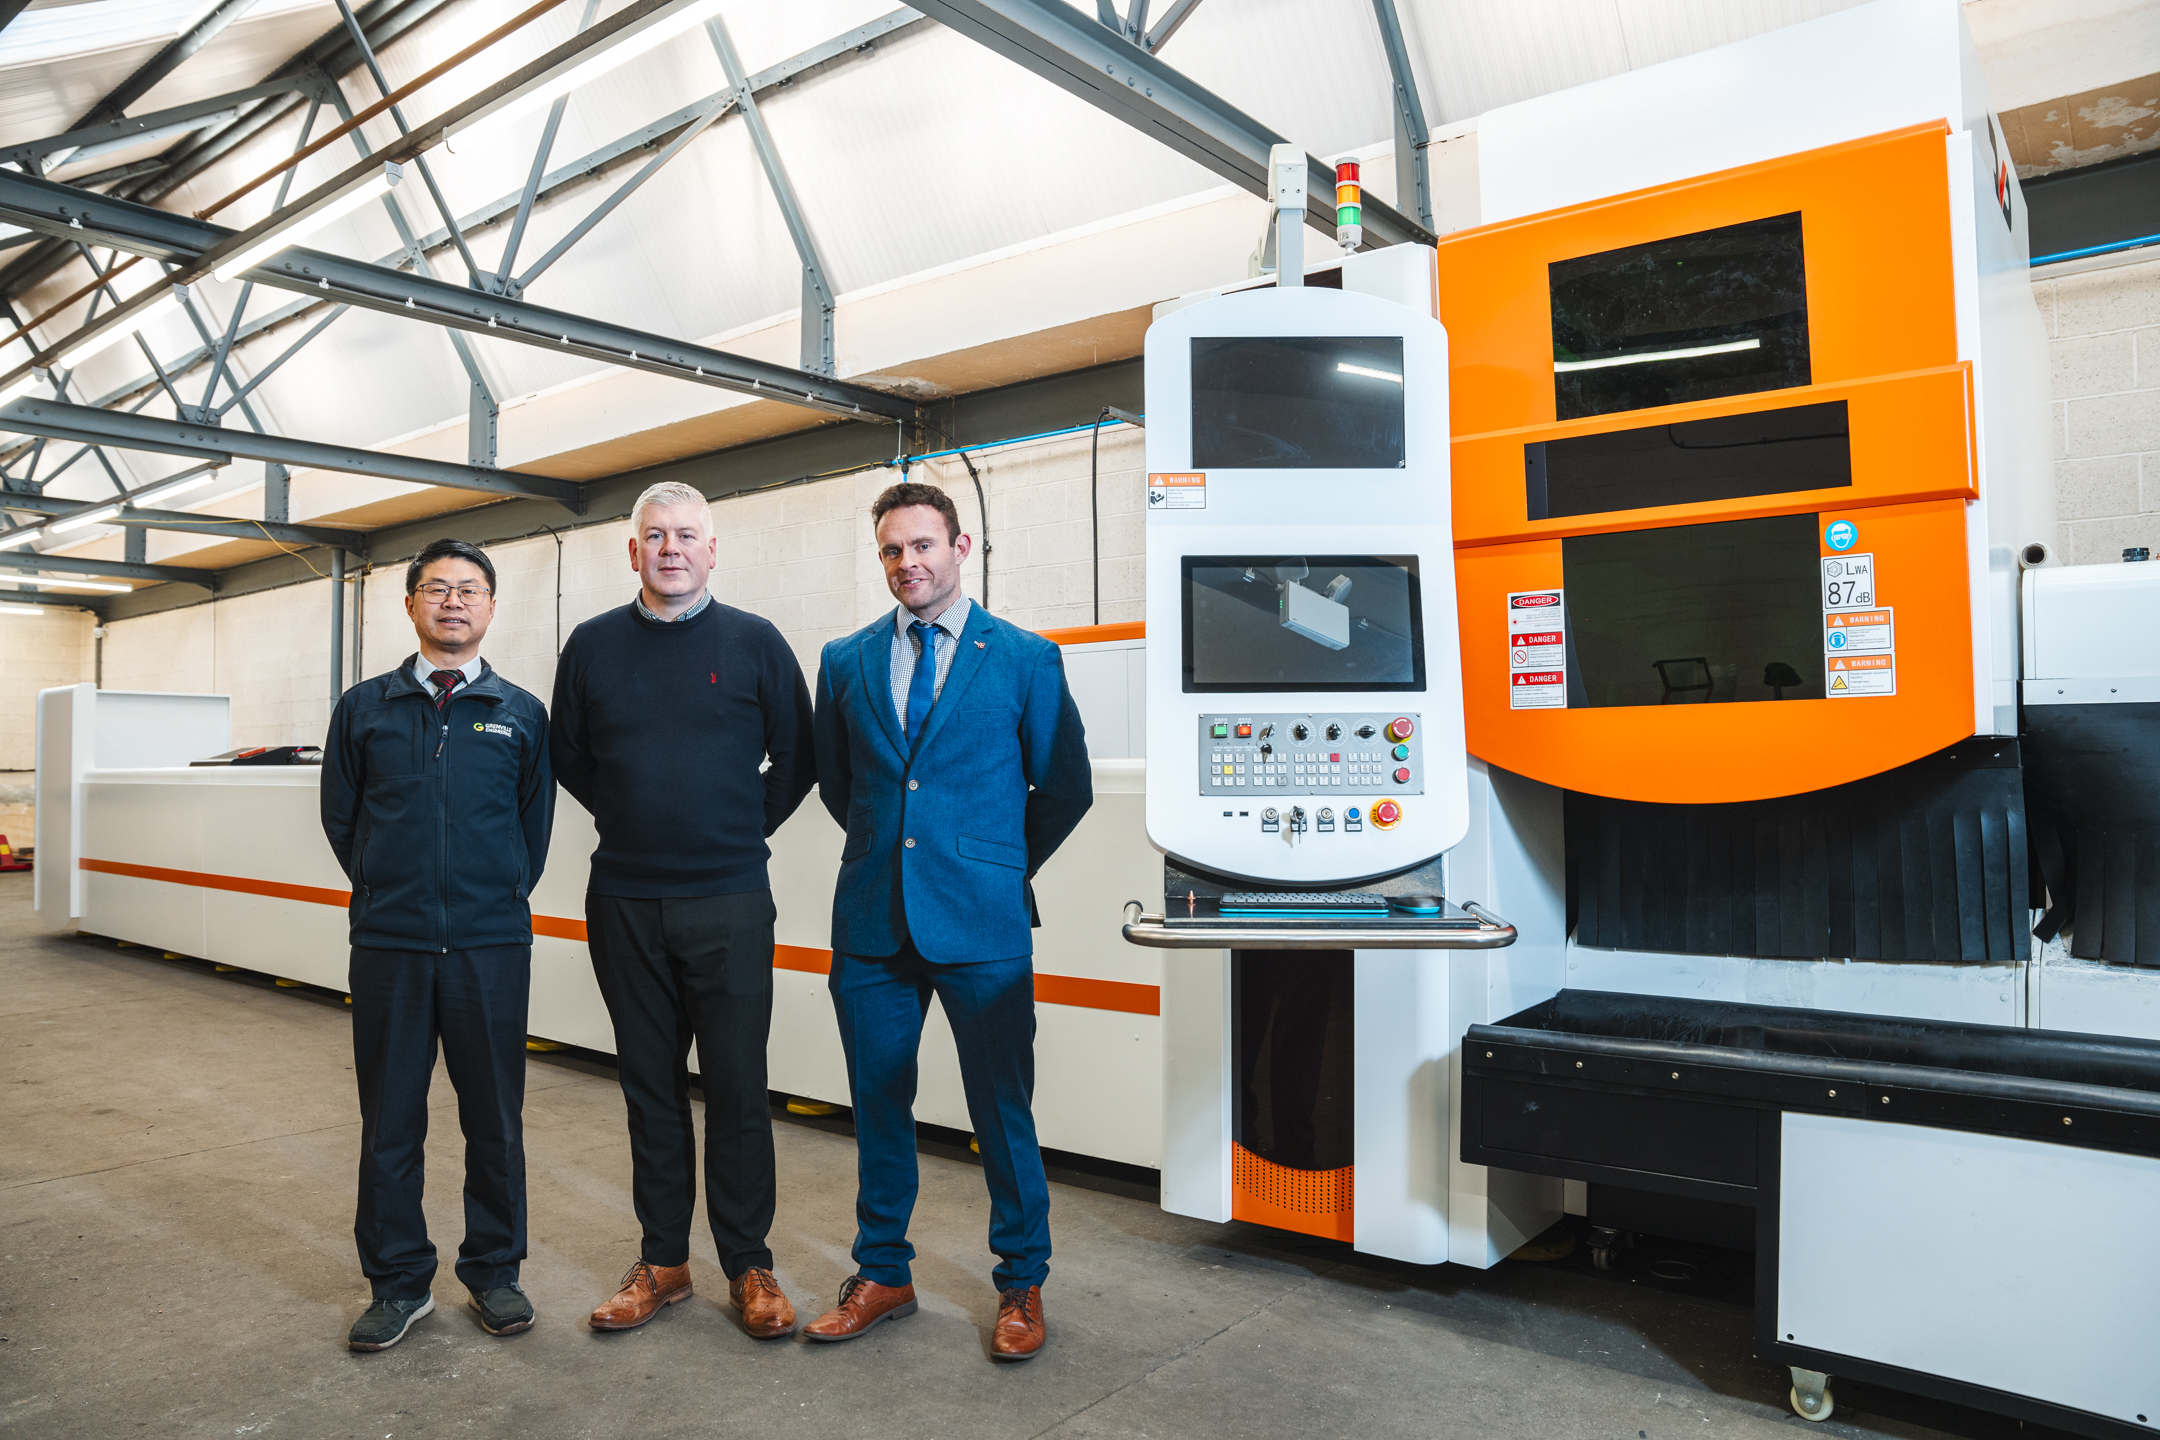 £250k Investment in State-of-the-Art SmartFibre CNC Tube Laser Cutting Machine